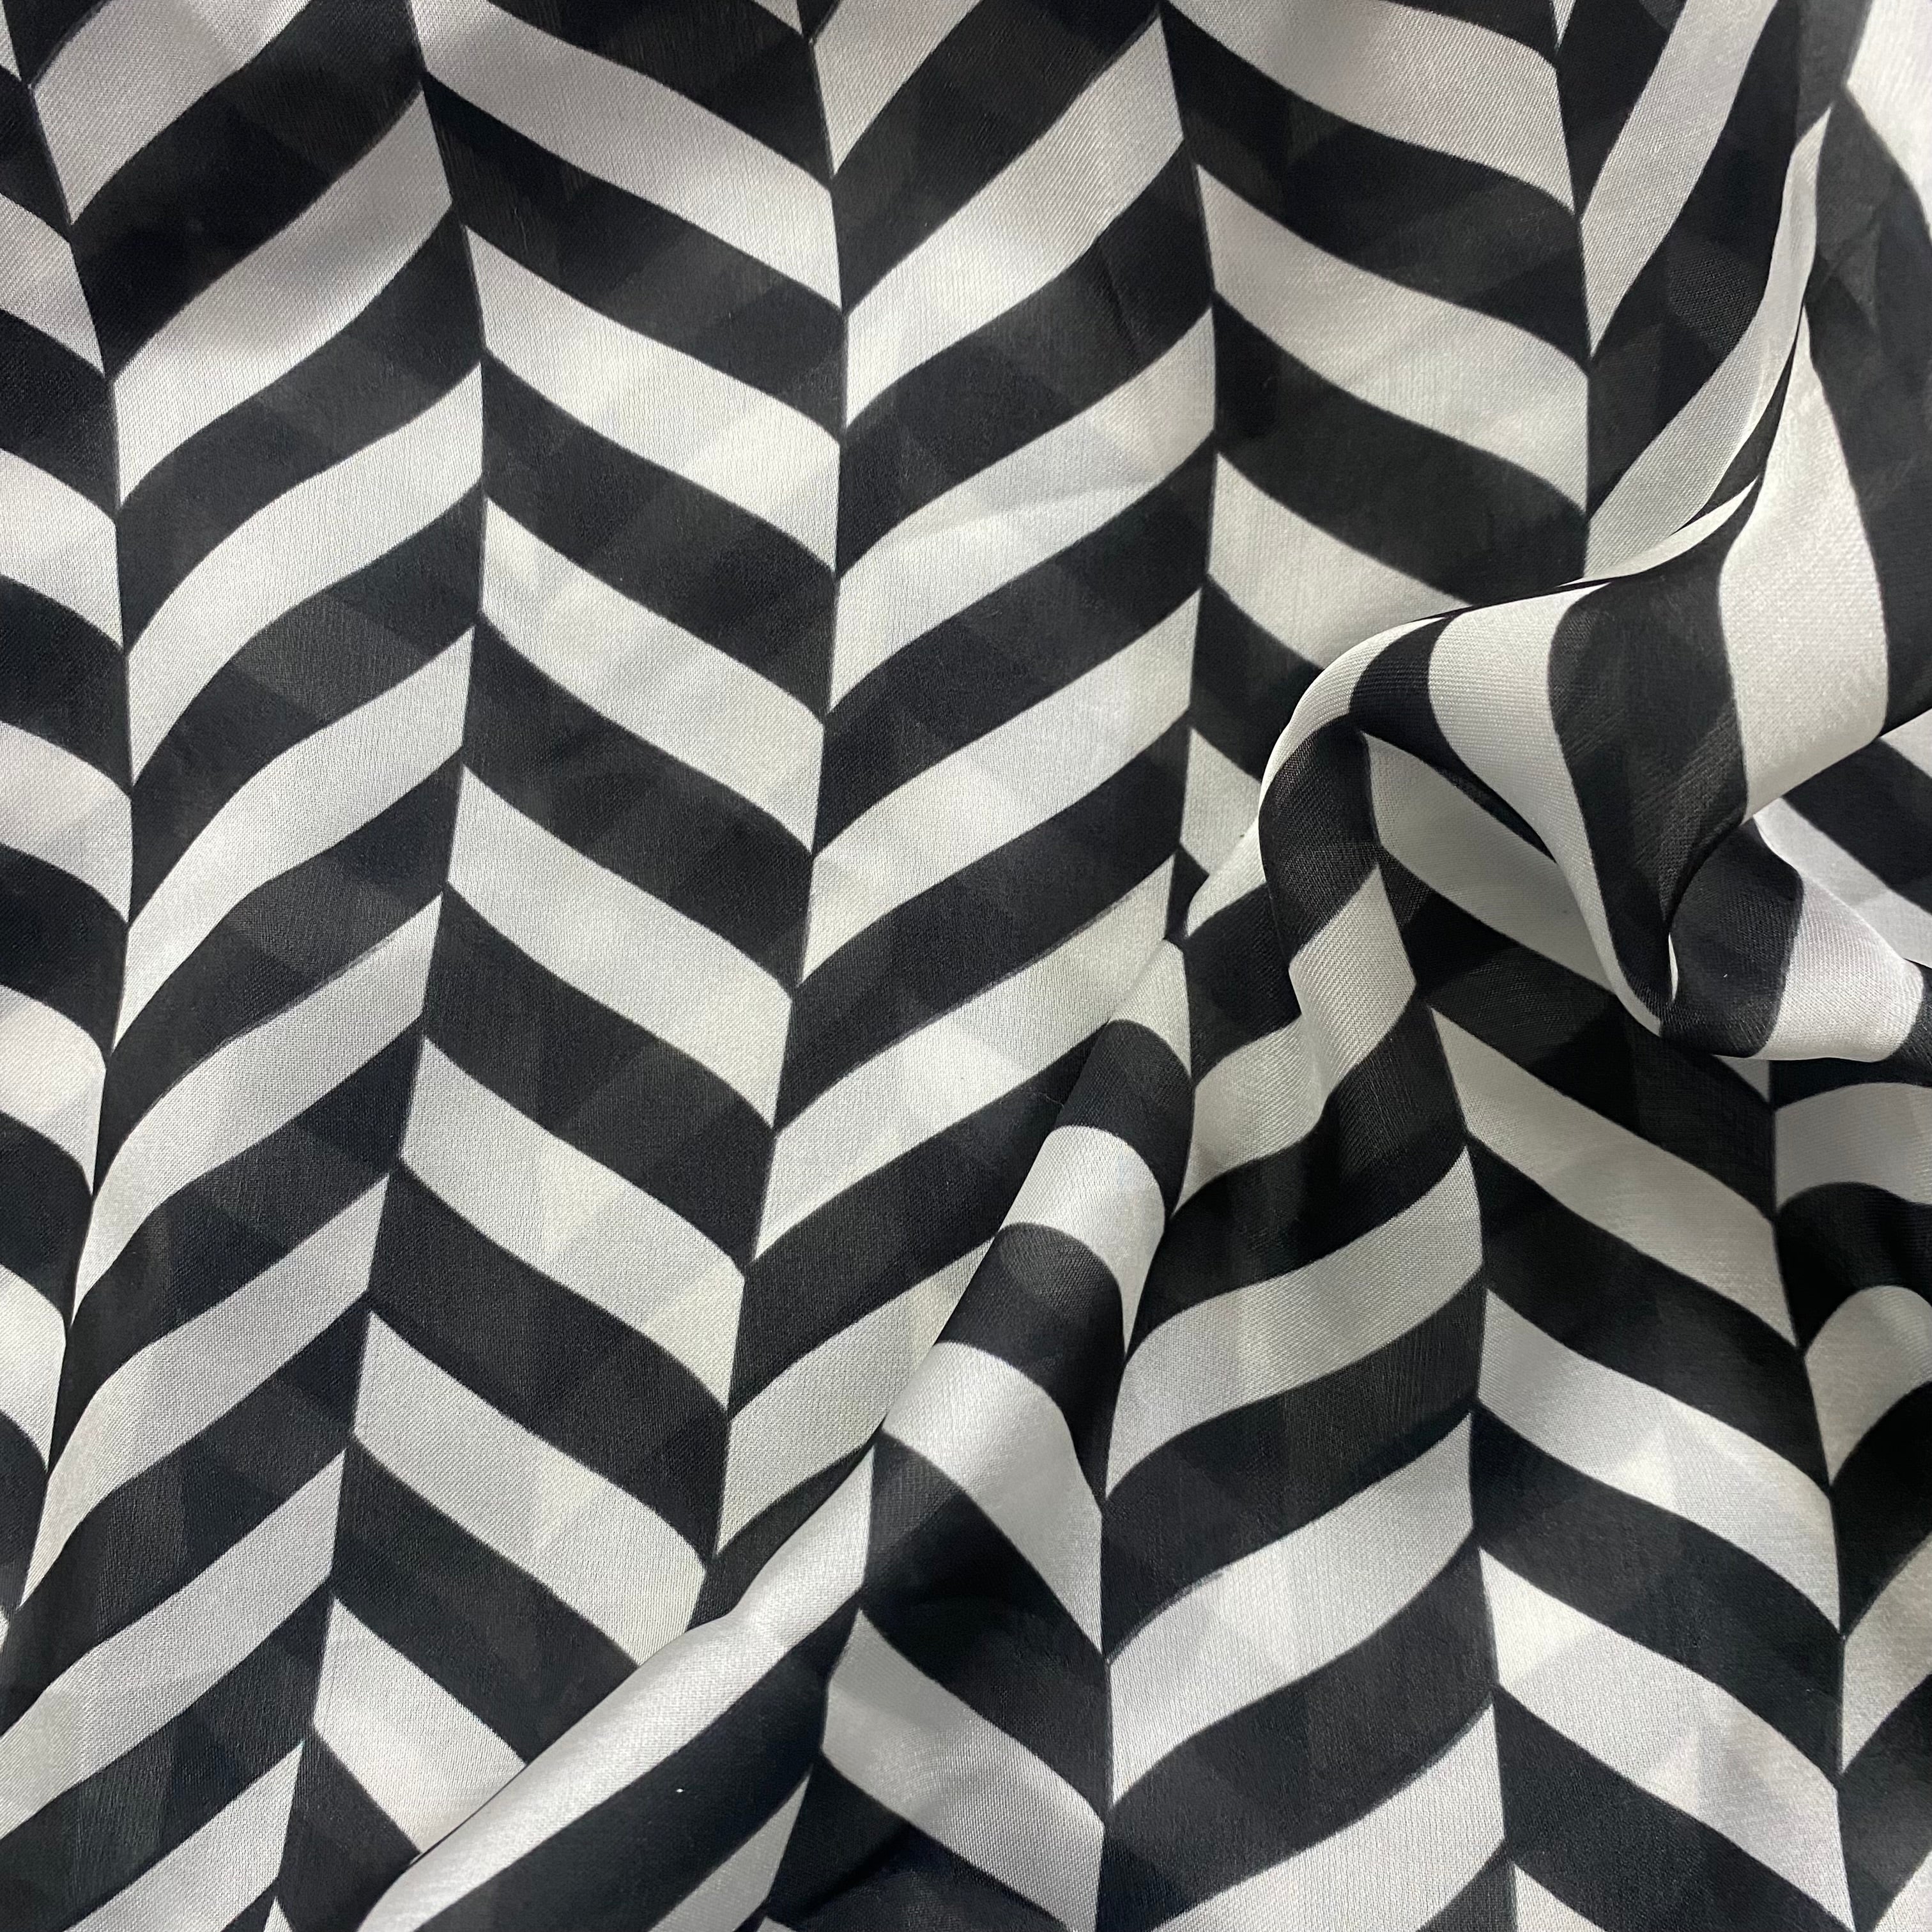 Black & white contrast abstract print on georgette satin fabric per meter